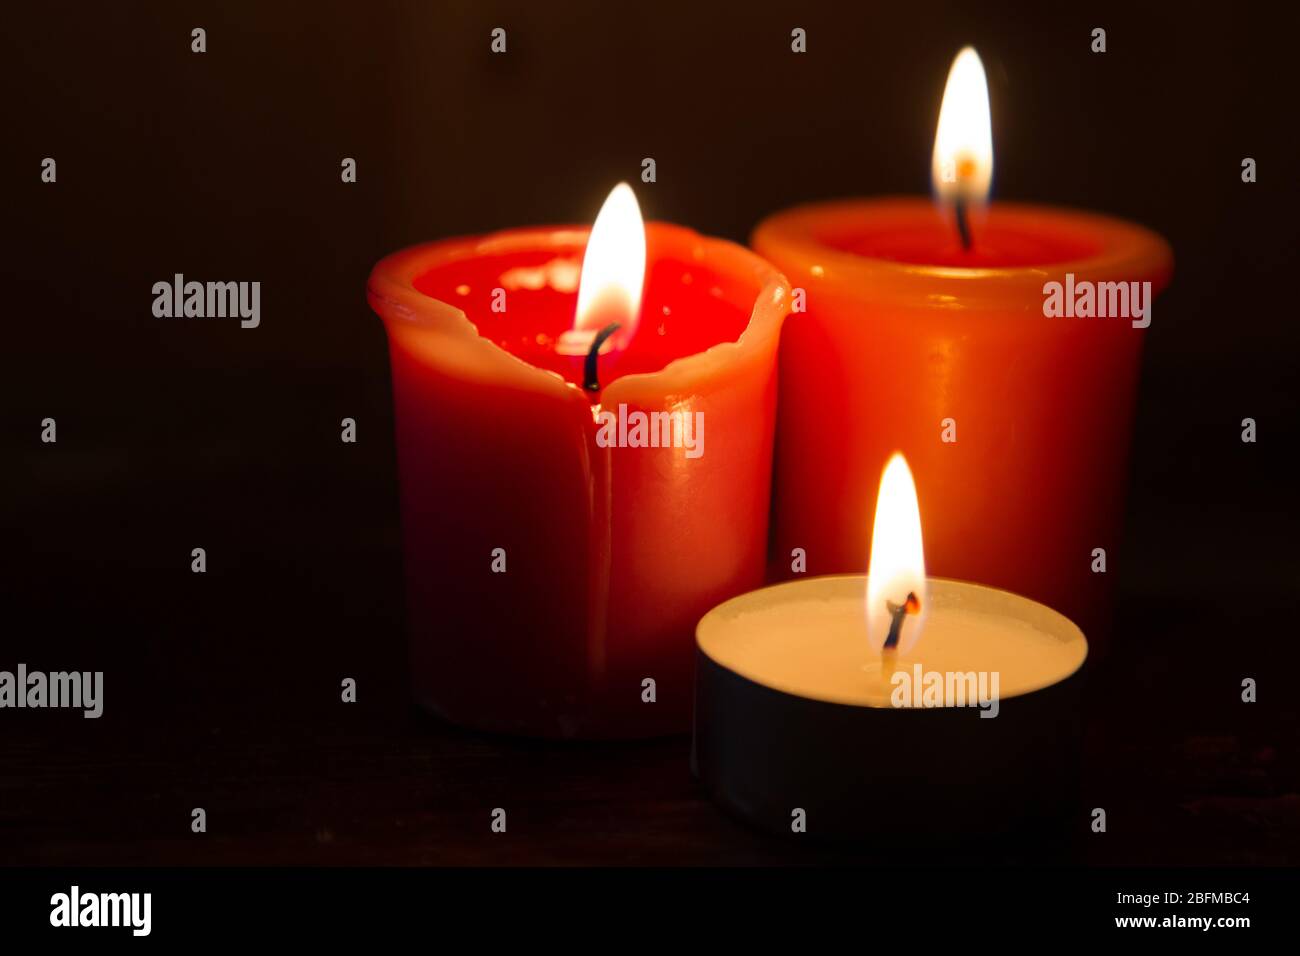 romantic lit candles for love events or spas Stock Photo